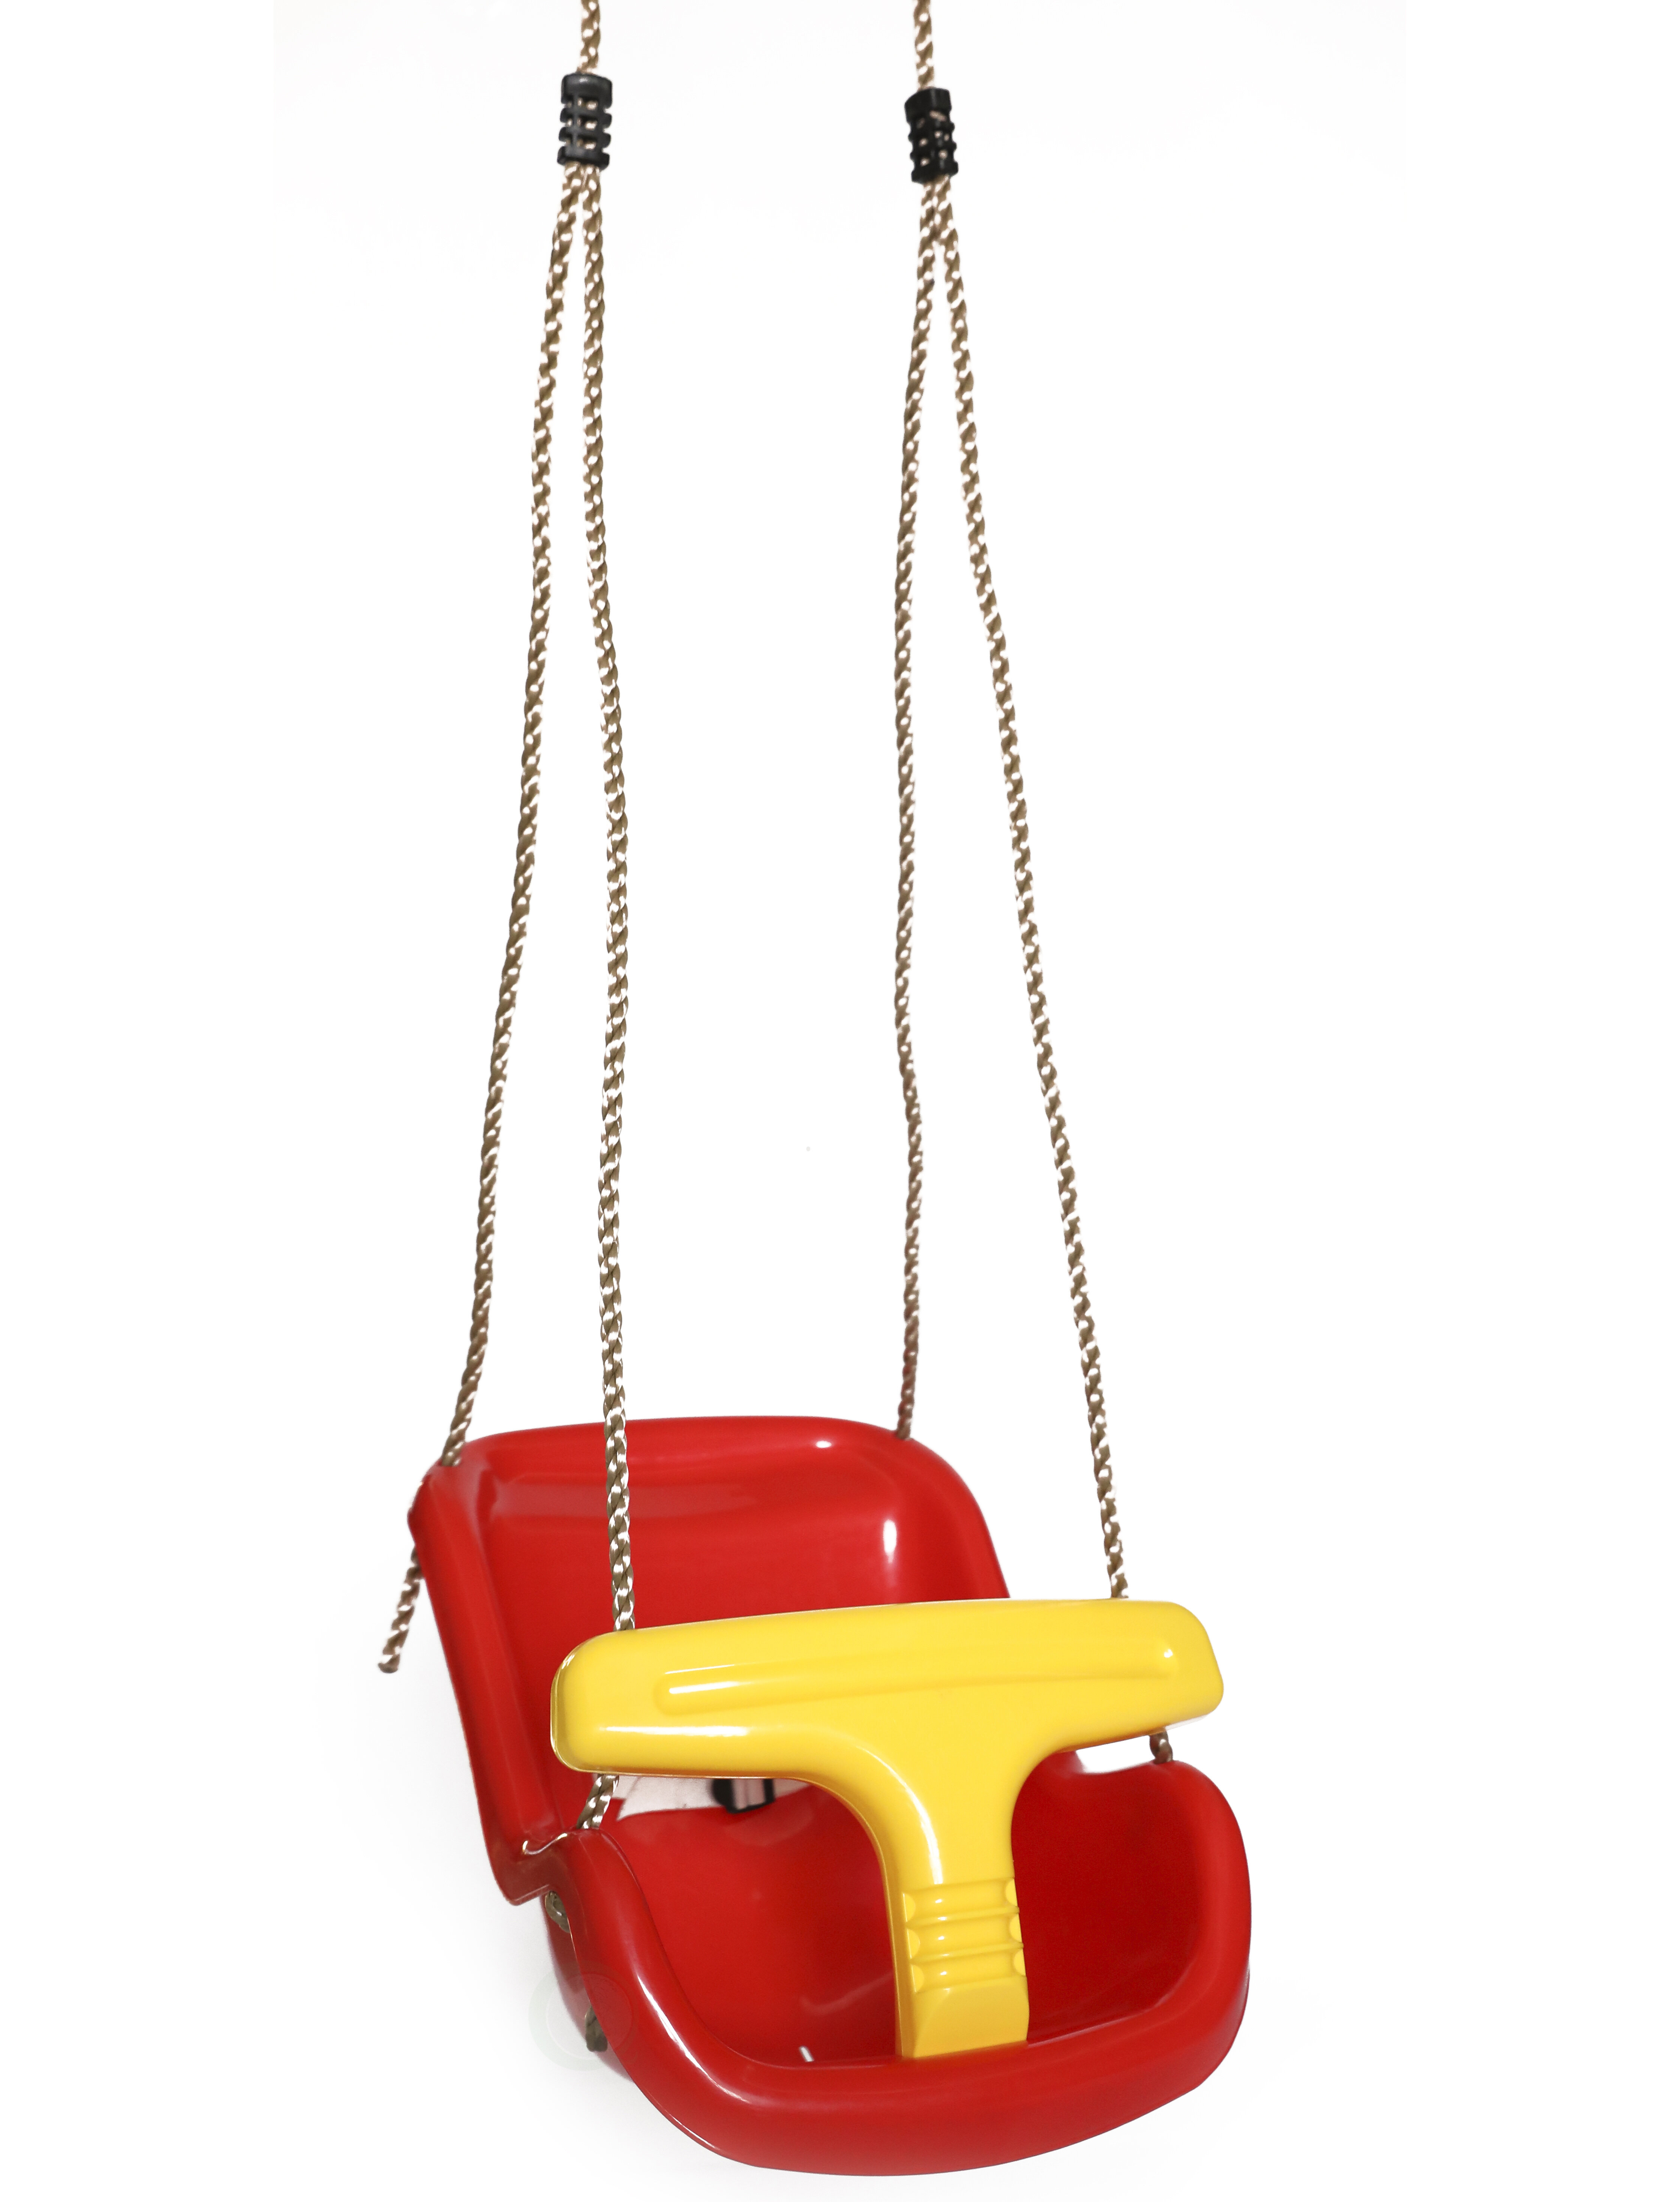 Plastic Swing Seat with Rope Children Outdoor Play 